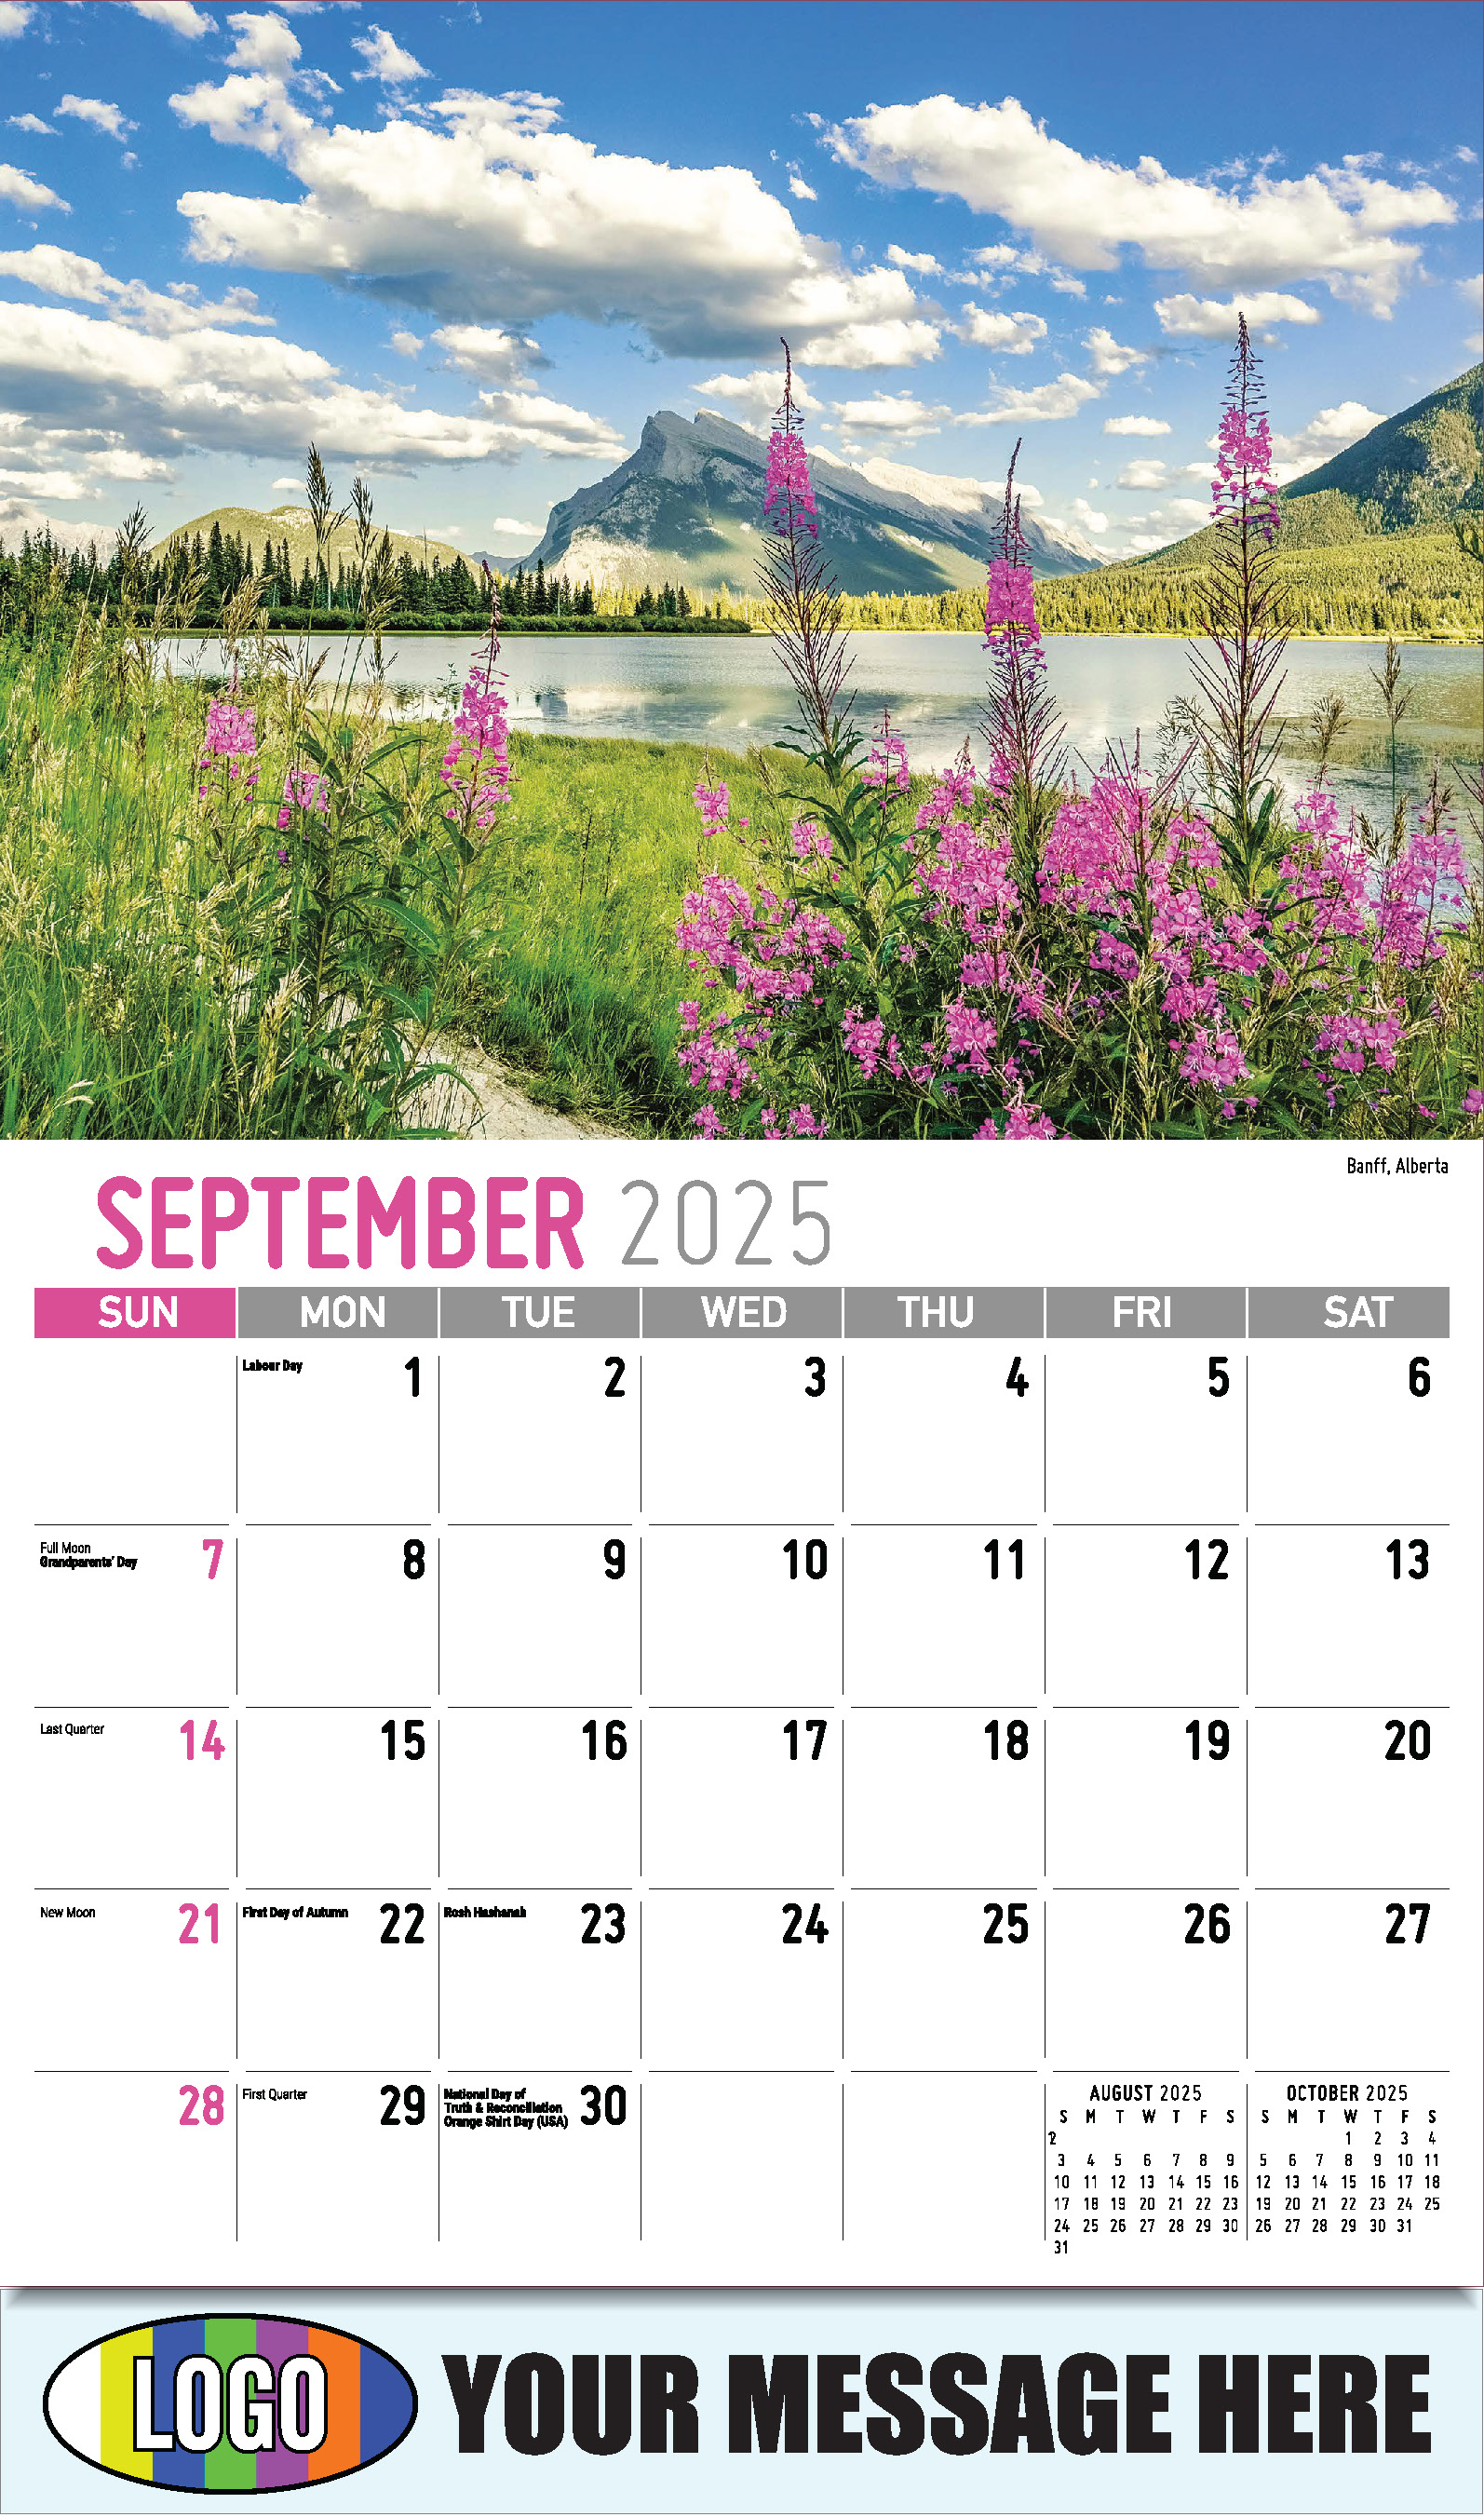 Scenes of Western Canada 2025 Business Promotional Wall Calendar - September